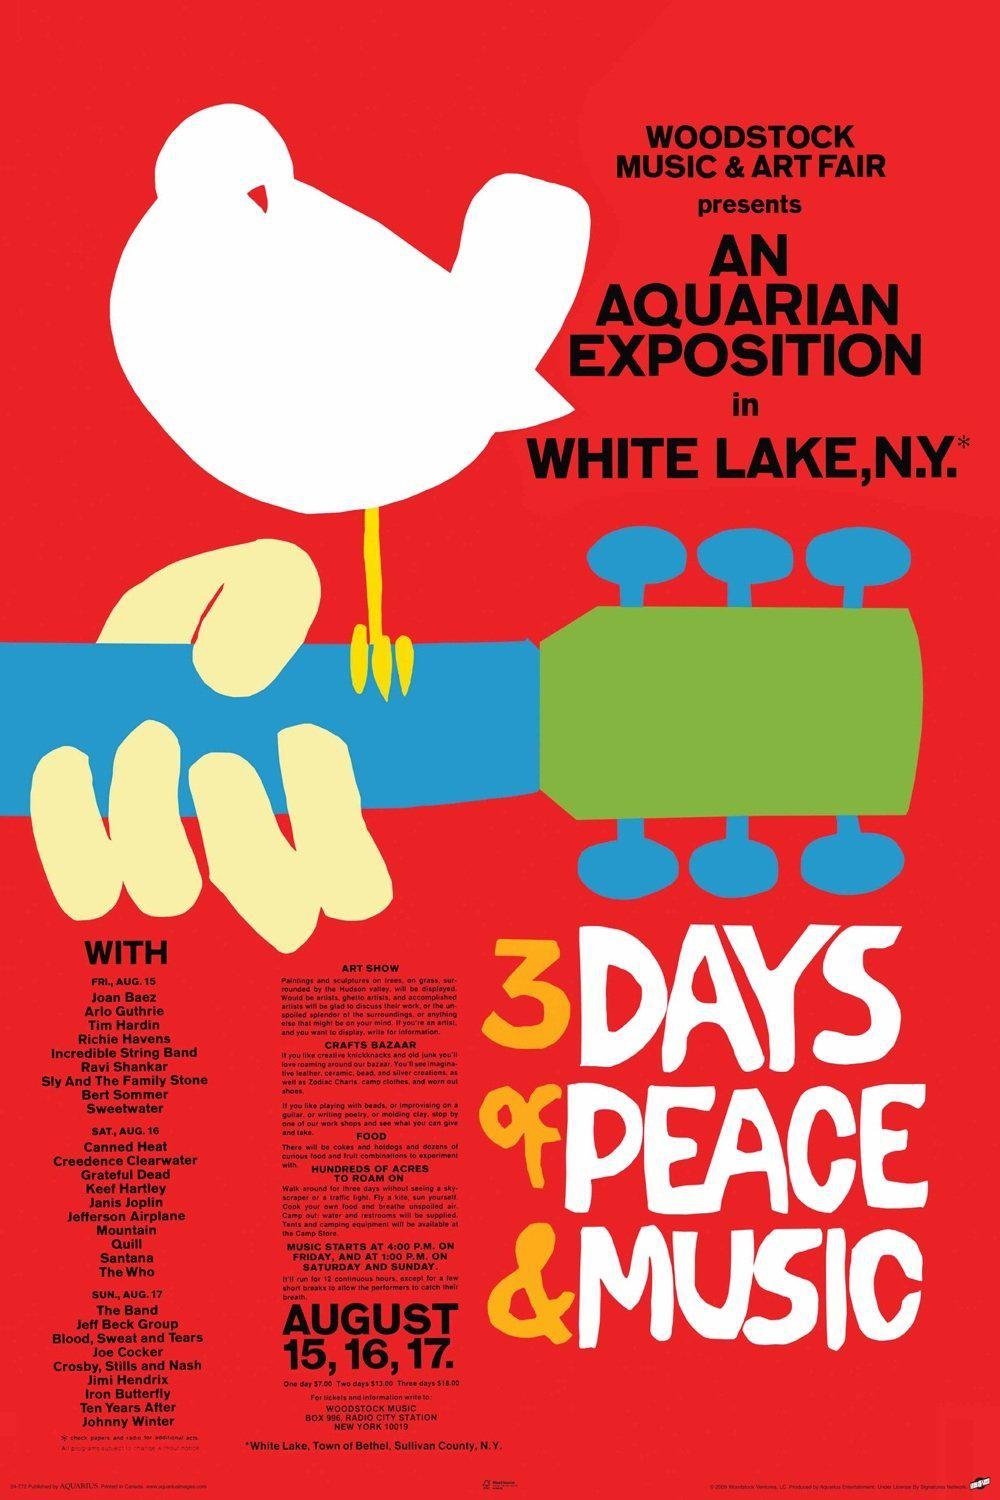 The History of the Woodstock Festival - Part 3